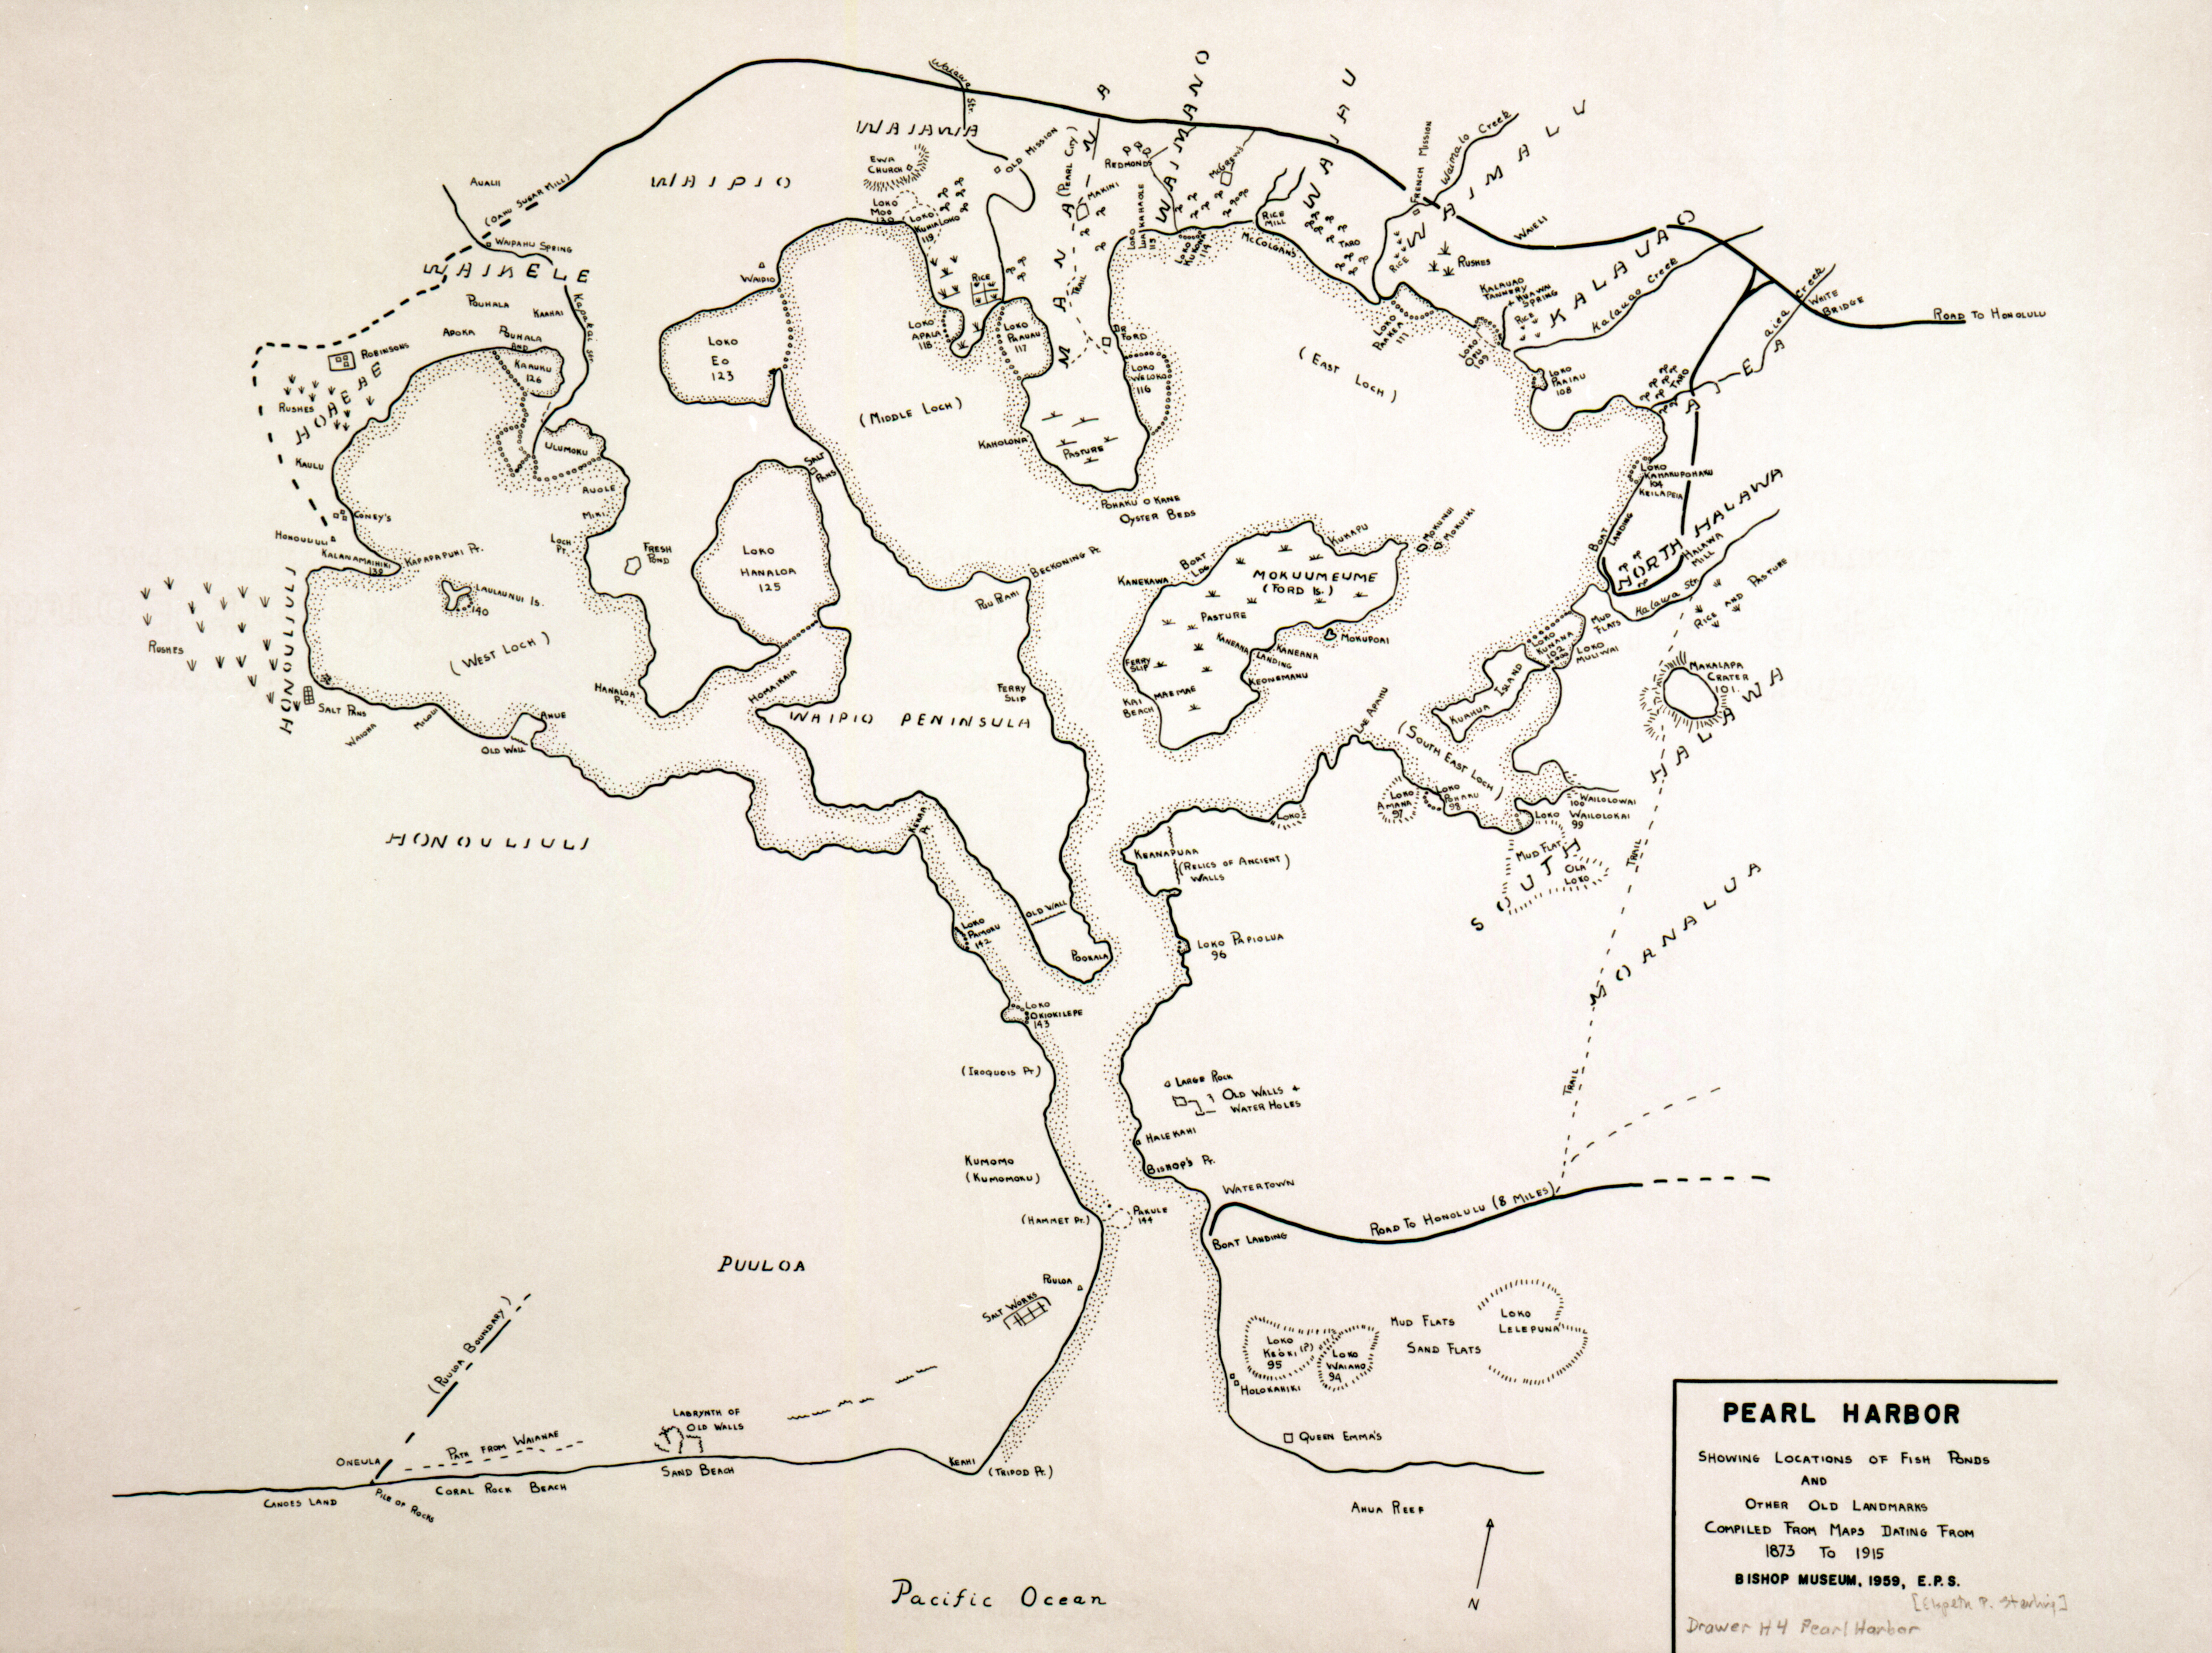 [Map of Pearl Harbor] Showing locations of fishponds and other old landmarks. Artist unknown.